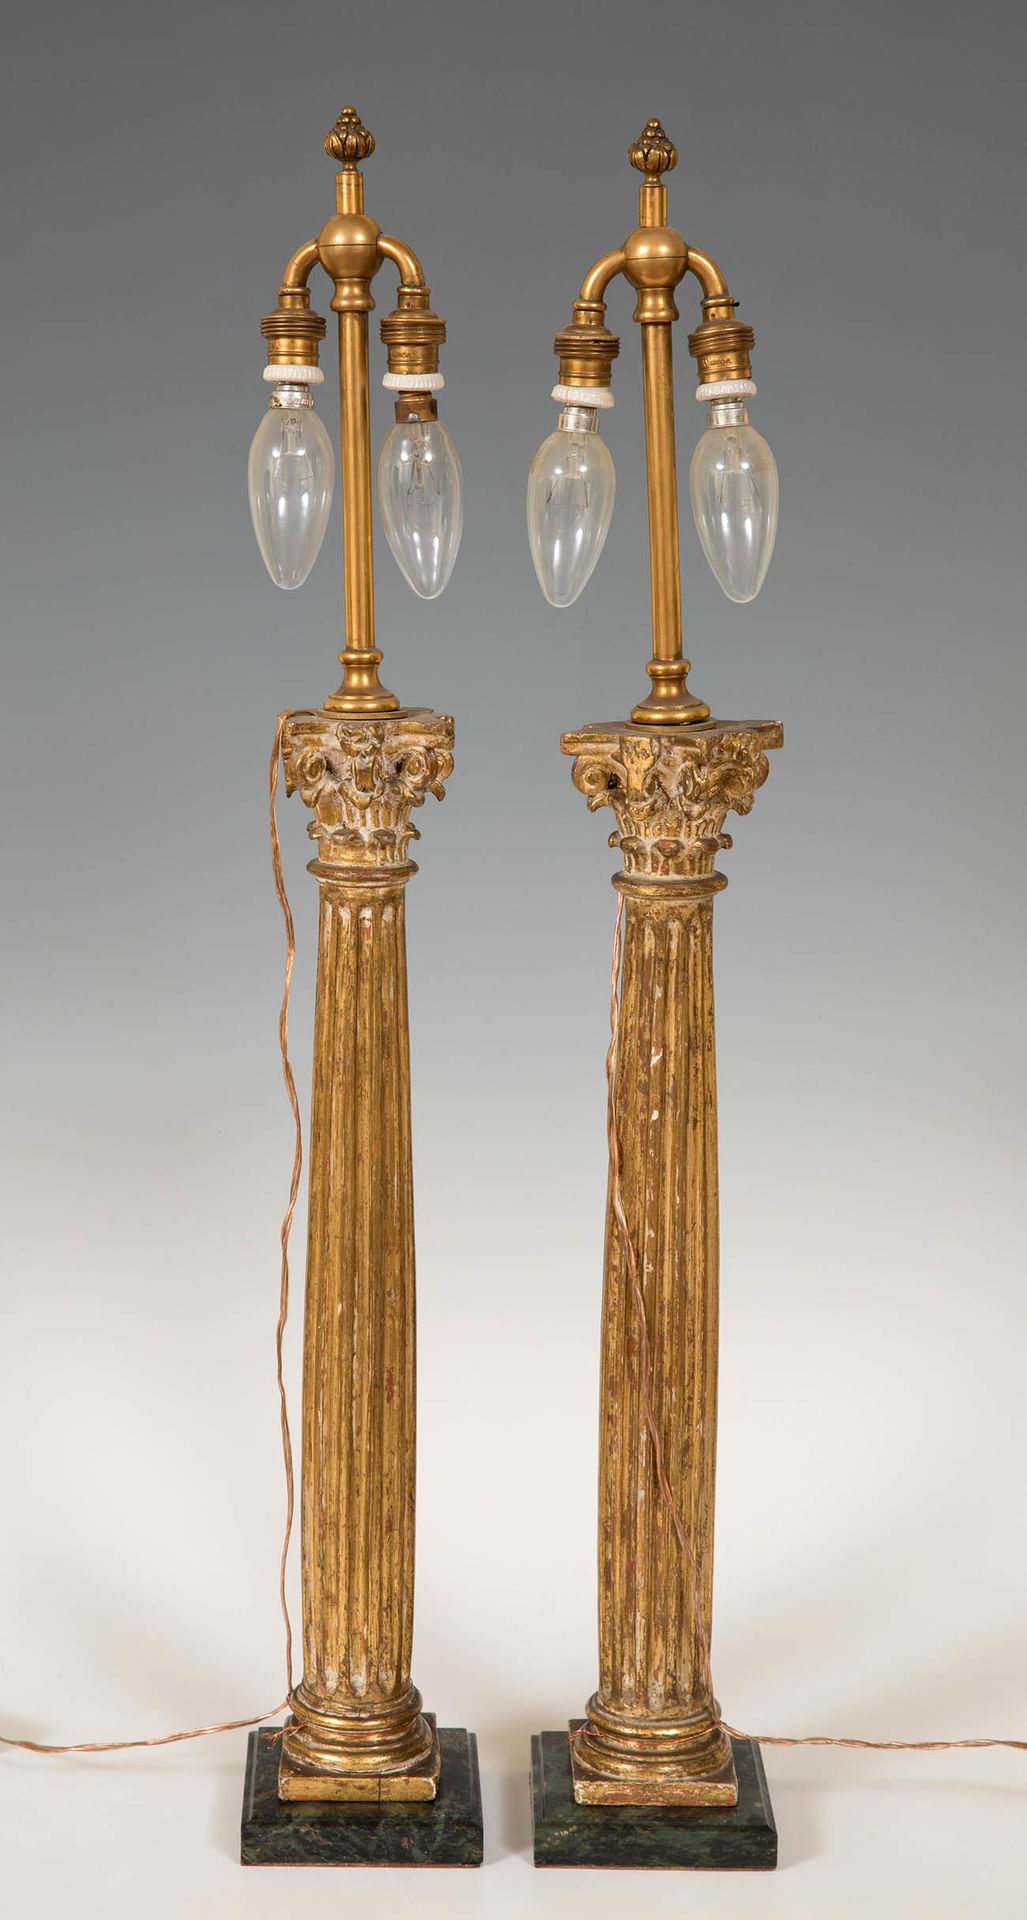 Pair of lamps, following 17th century models; early 20th century. Paire de lampe&hellip;